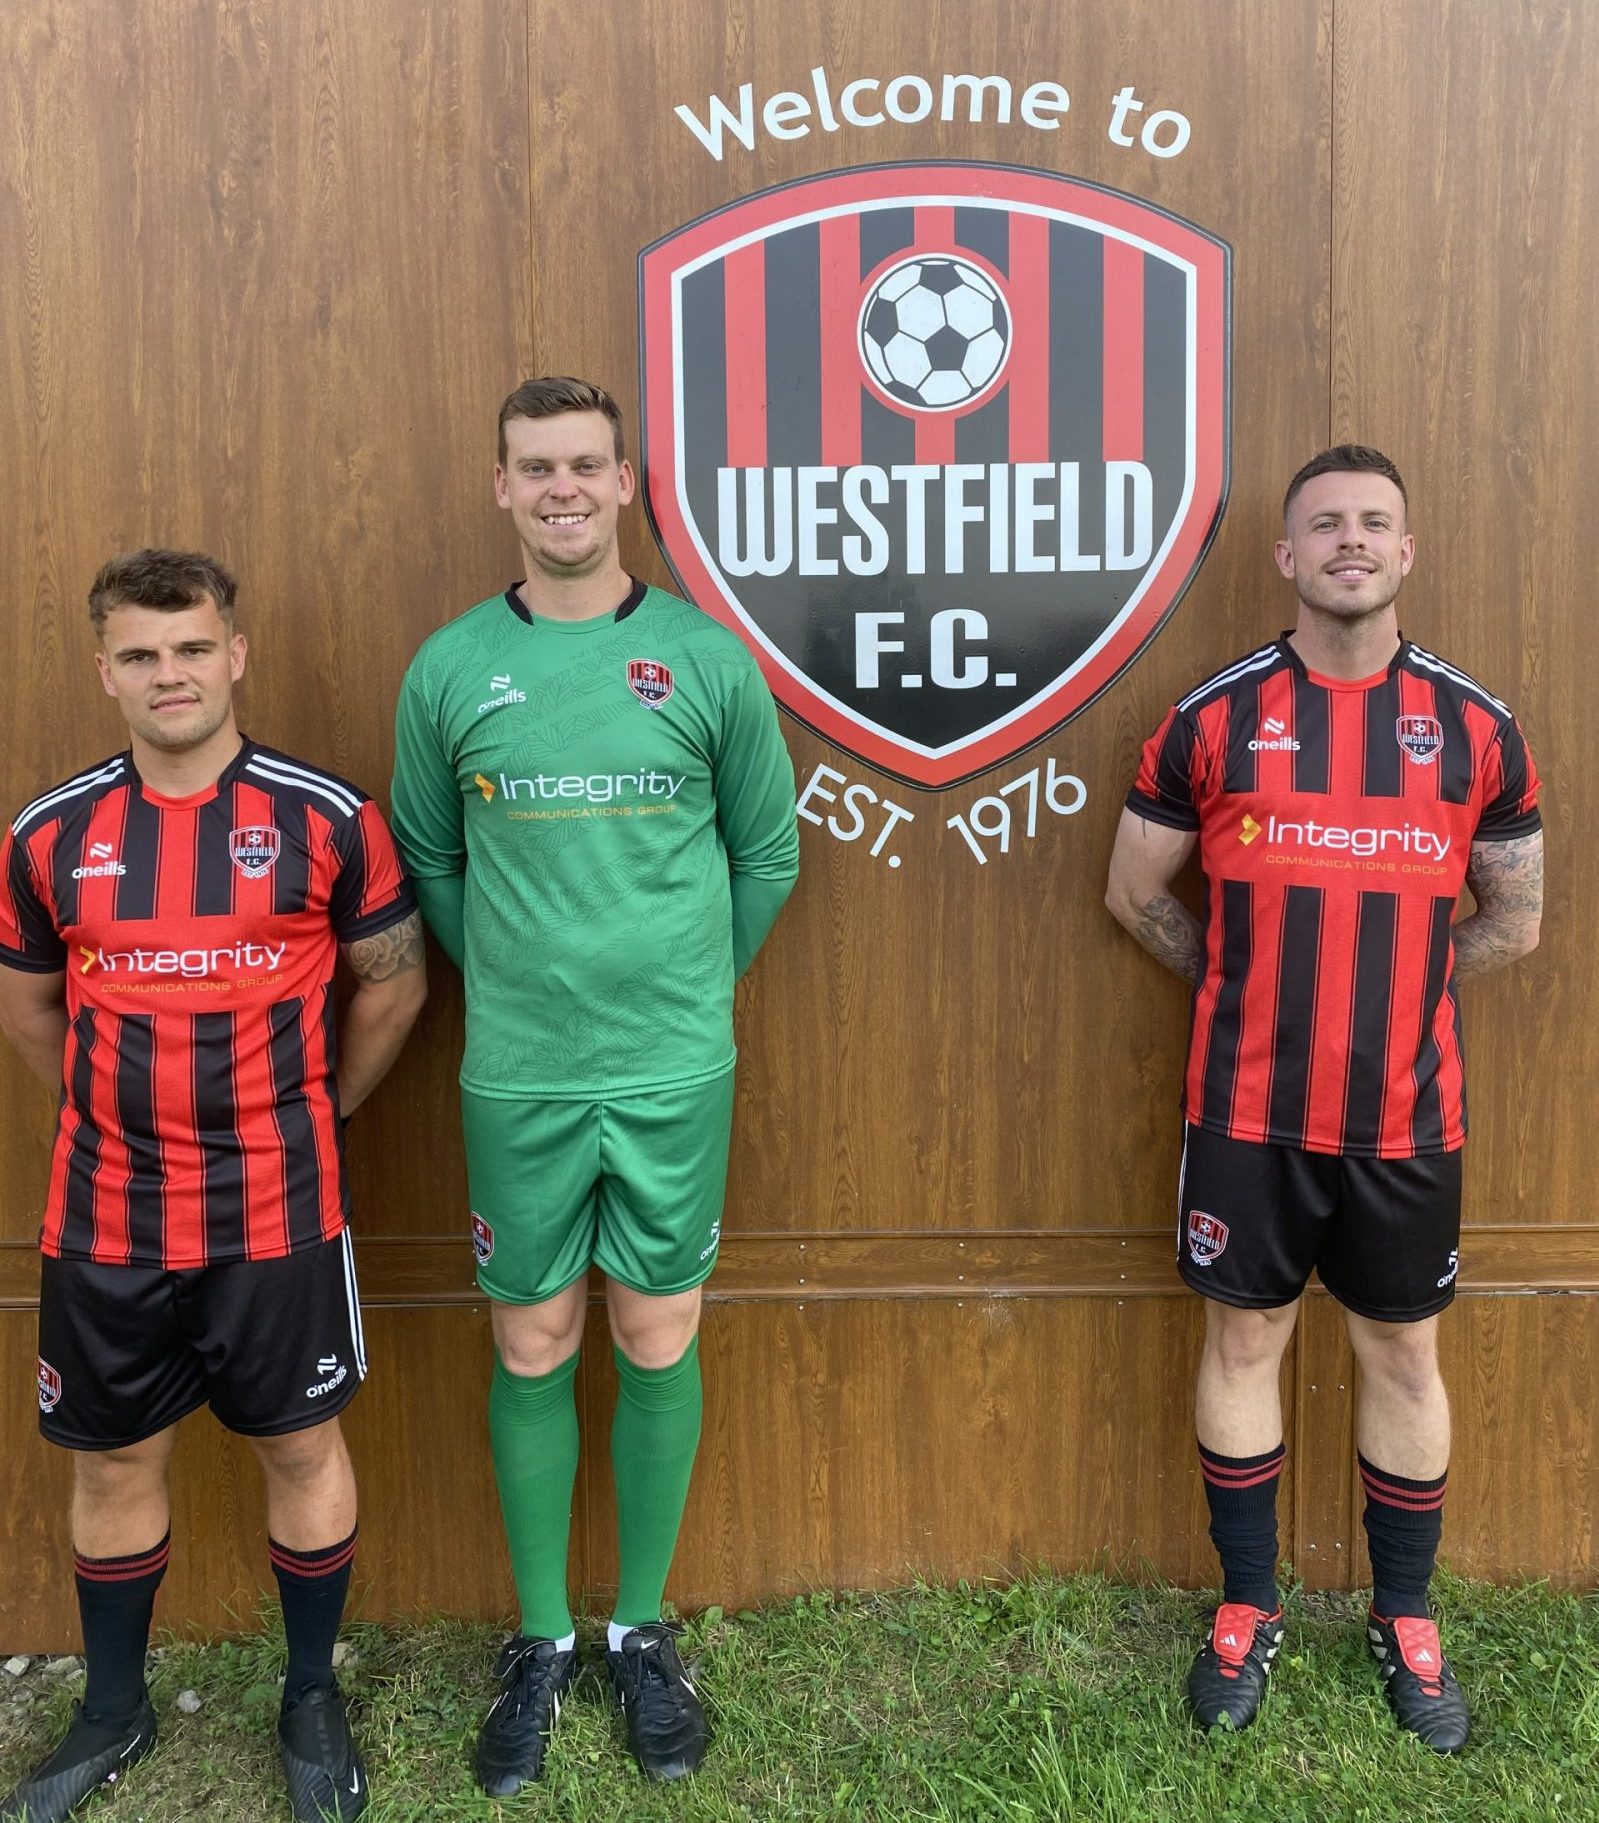 Integrity Communications Group Once Again Sponsors Westfield Football Club